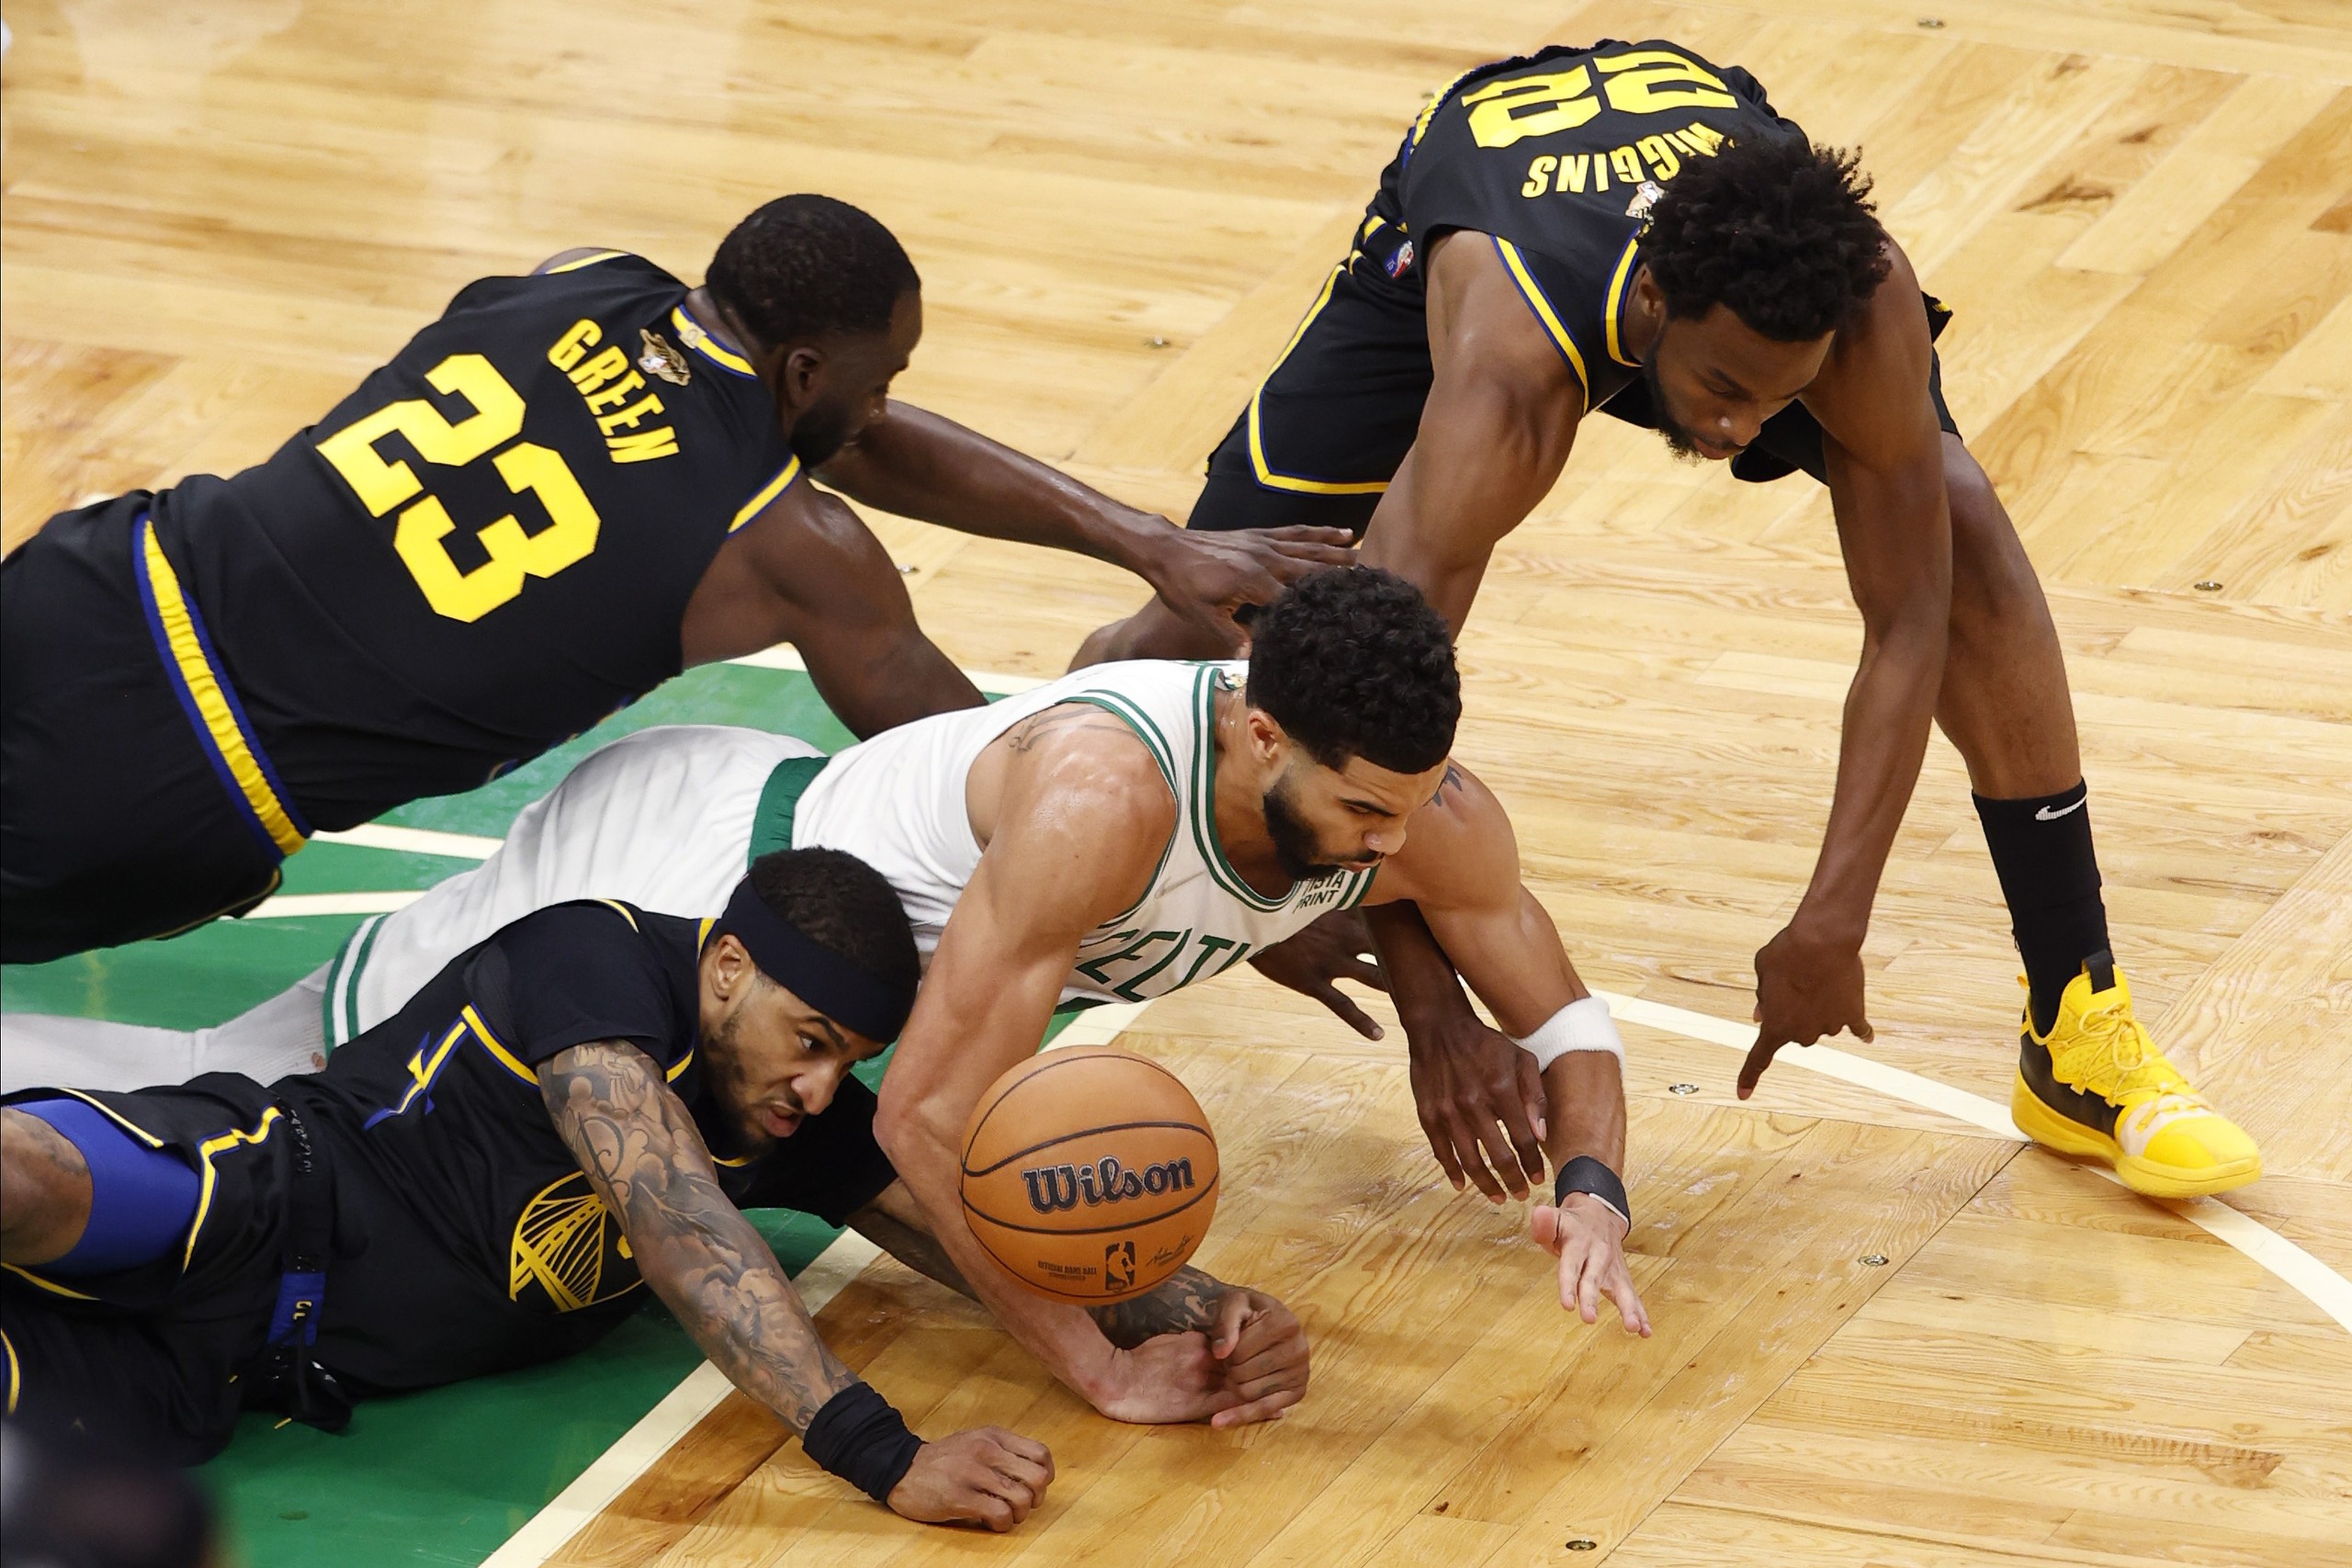 epa10003153 Boston Celtics forward Jayson Tatum (C), Golden State Warriors guard Gary Payton II (Bottom-L), Golden State Warriors forward Andrew Wiggins (R), and Golden State Warriors forward Draymond Green (Top-L), reach for a loose ball, during the first half of Game 3 of the National Basketball Association (NBA) Finals between the Boston Celtics and the Golden State Warriors at TD Garden, in Boston, Massachusetts, USA, 08 June 2022. The best of seven series is tied 1-1.  EPA/CJ GUNTHER  SHUTTERSTOCK OUT